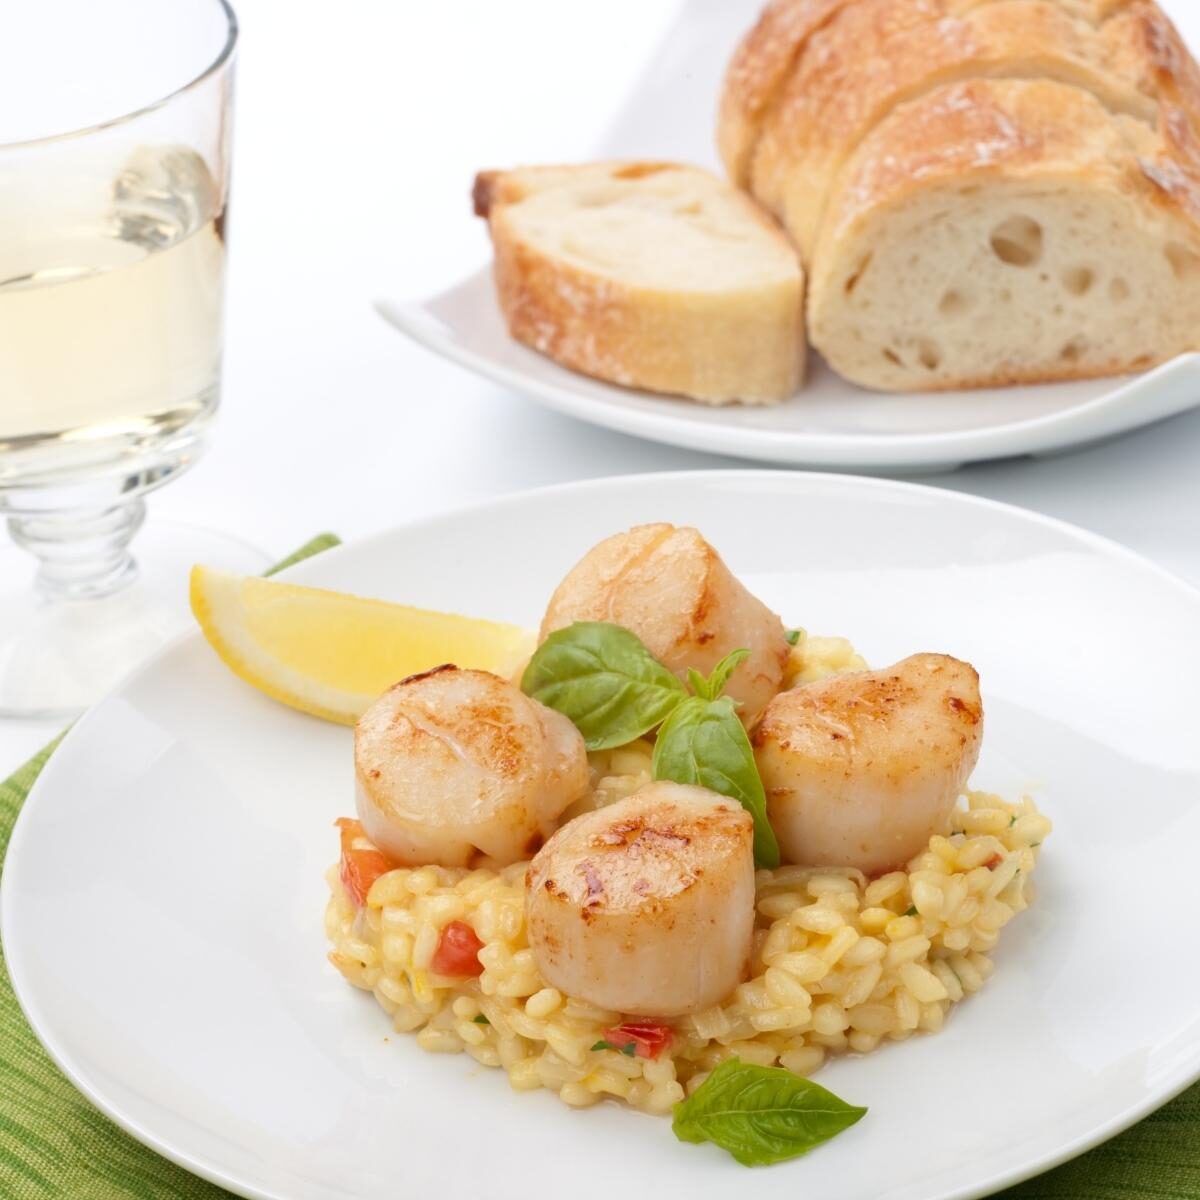 Seared scallops on creamy pale yellow risotto with a glass of white wine and sliced ciabatta bread in the background.